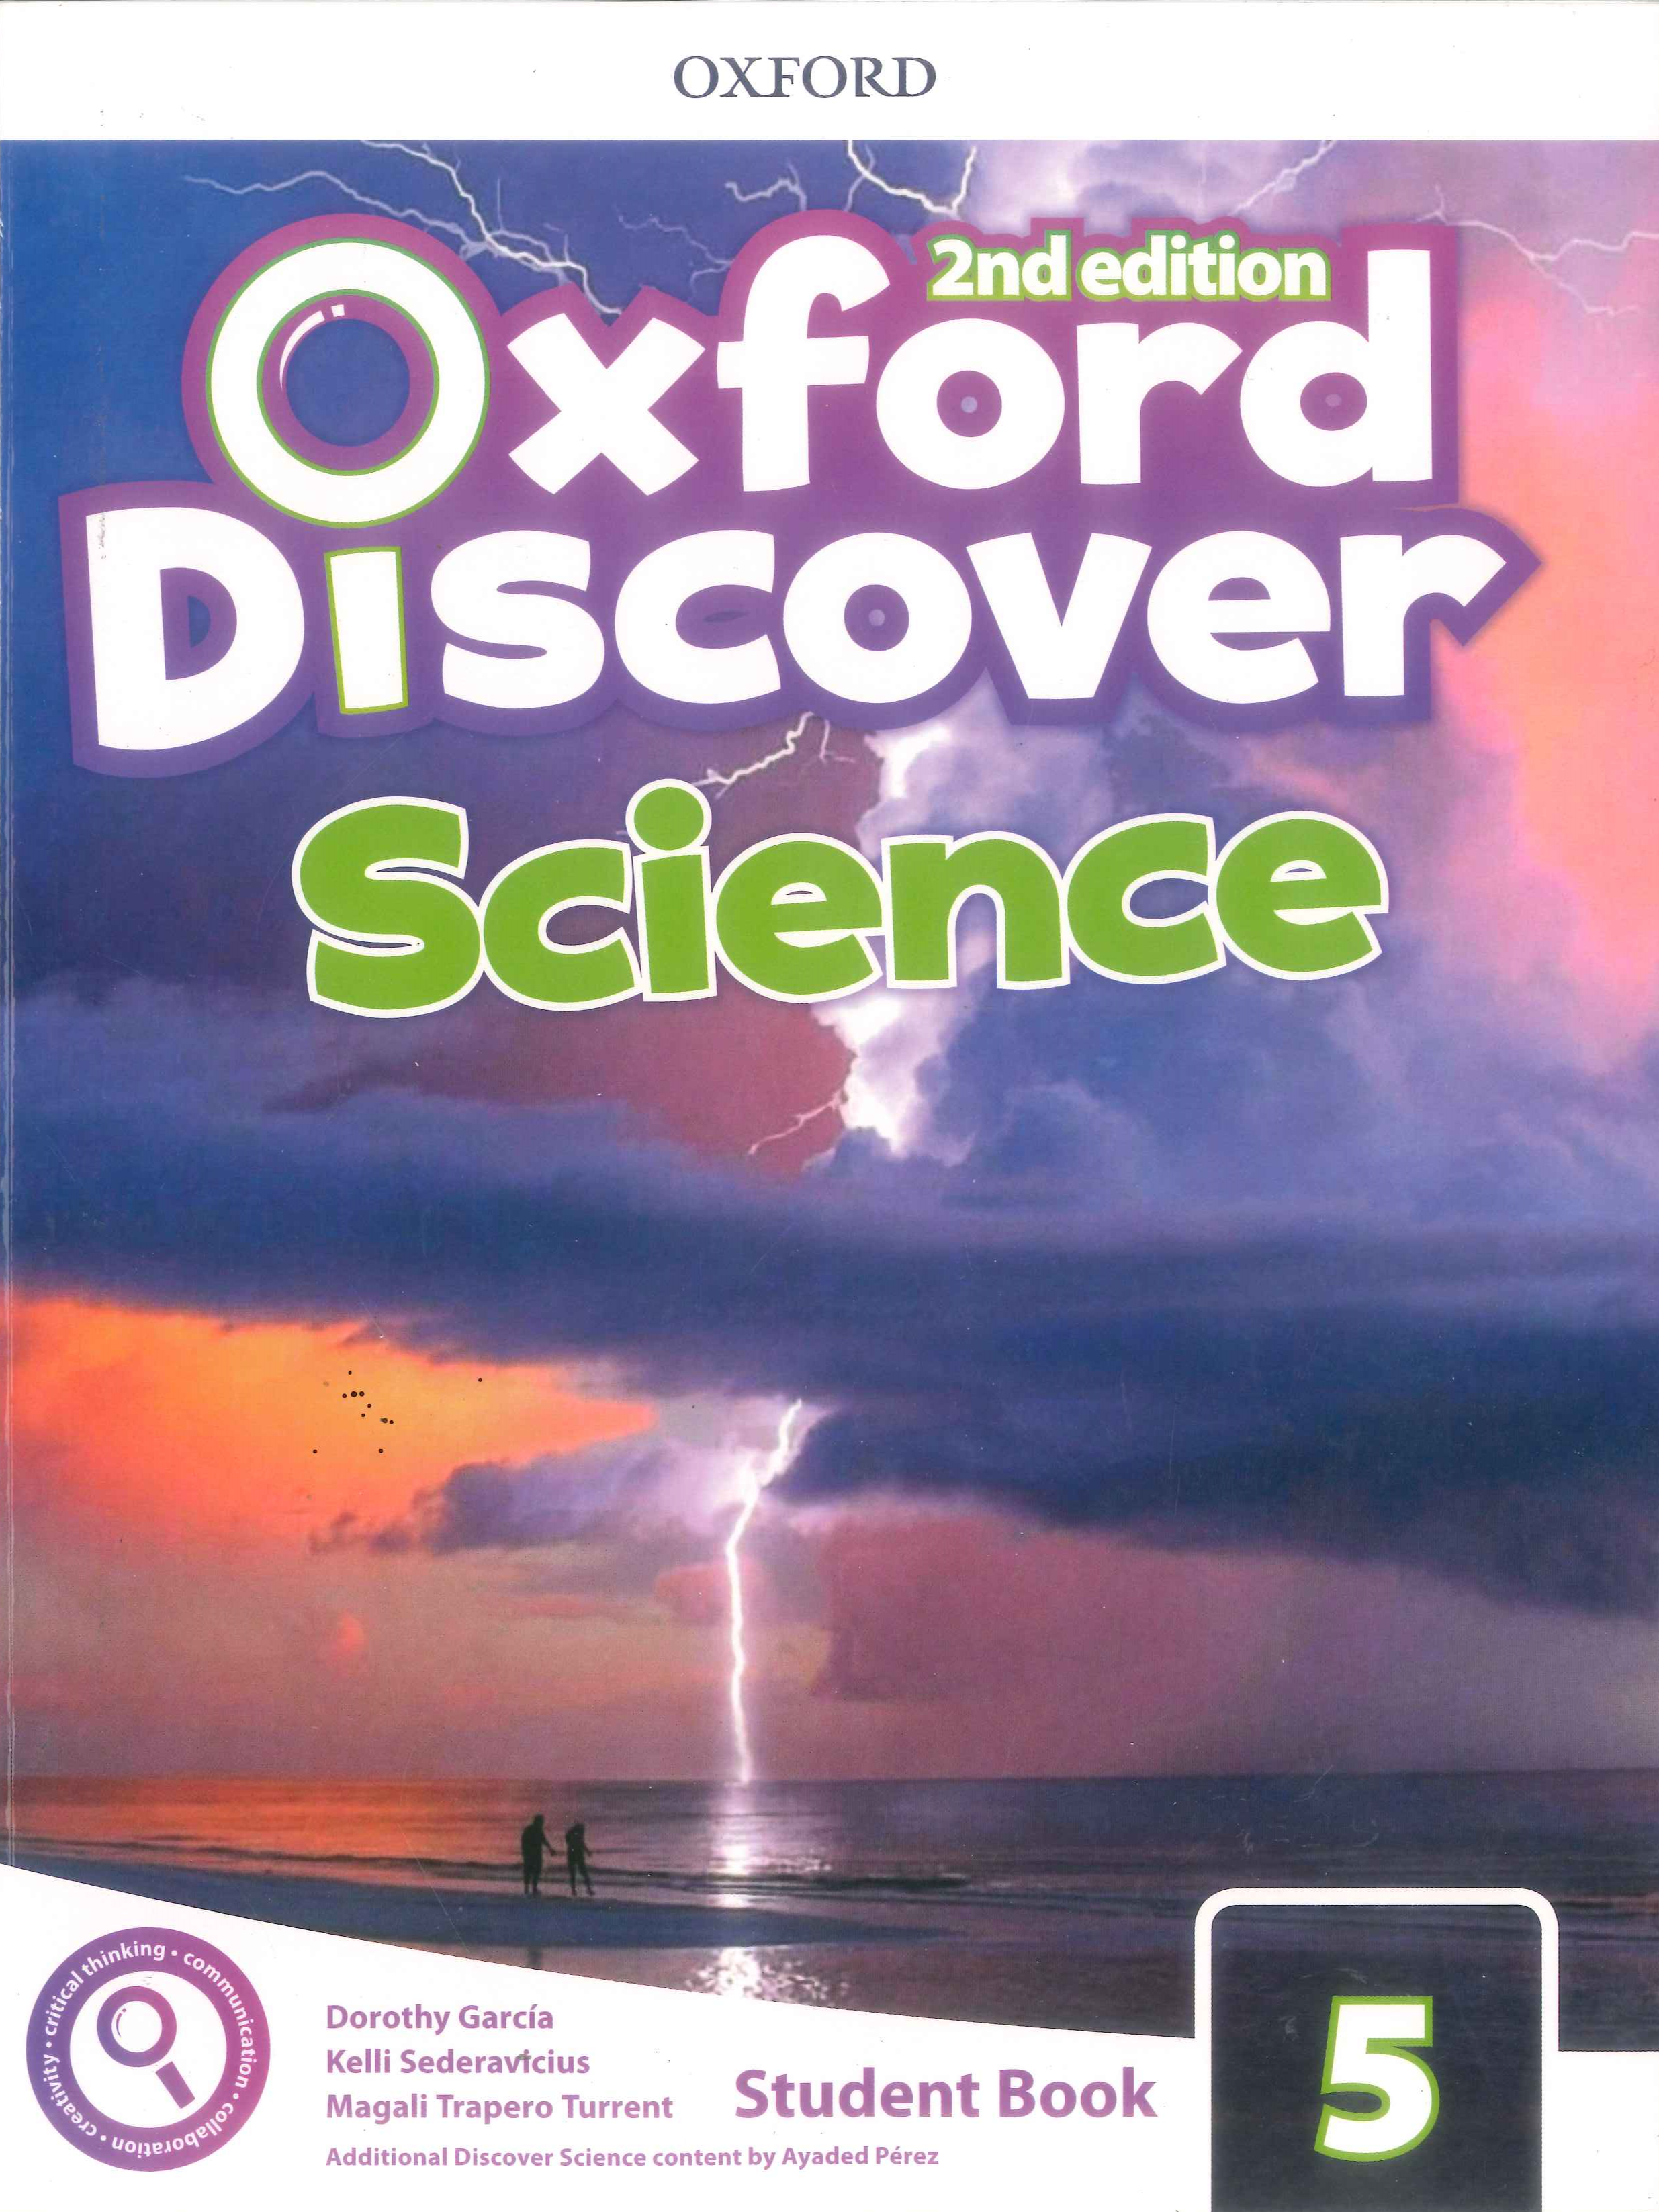 Oxford discover audio. Oxford discover 2nd Edition. Oxford Discovery. Oxford Discovery 1. Oxford discover 1 student book.